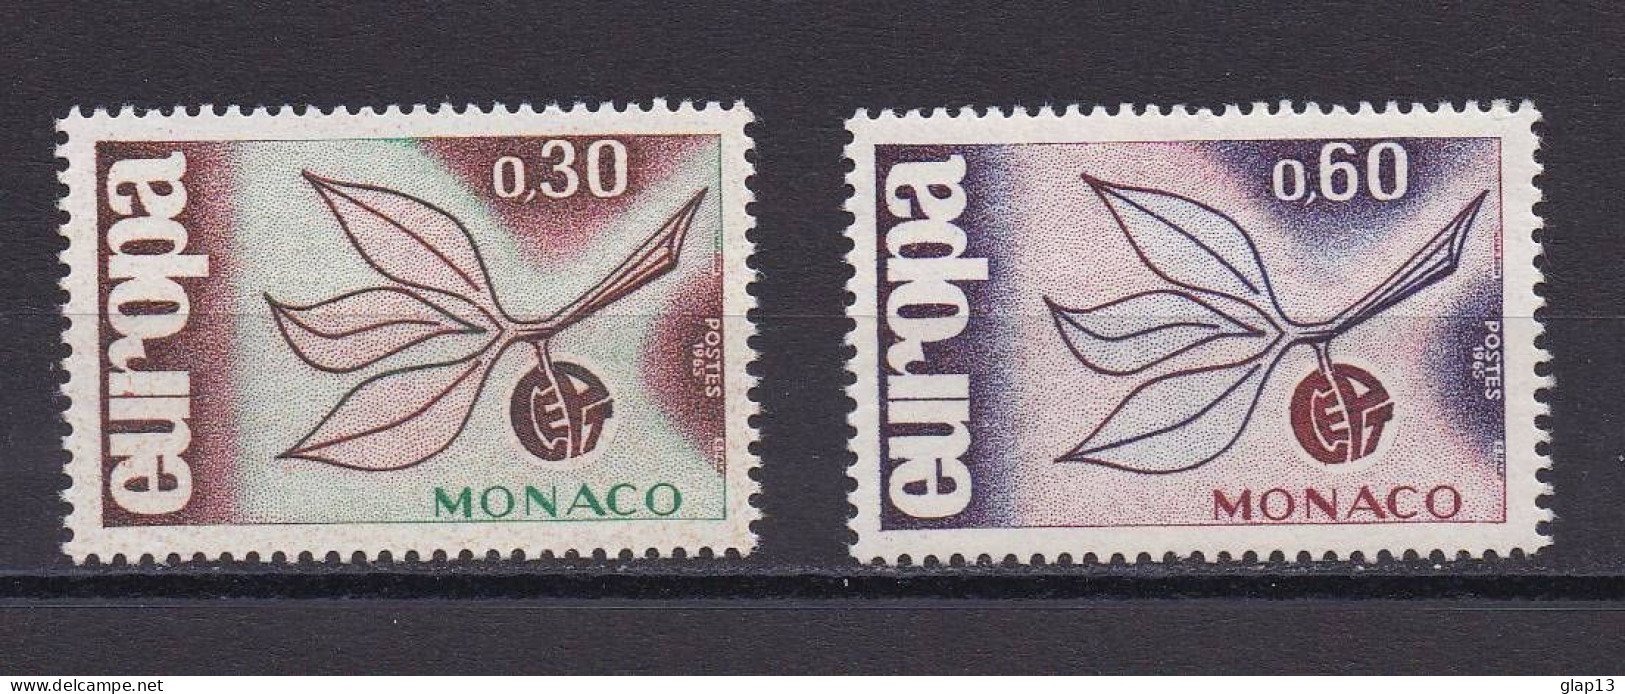 MONACO 1965 TIMBRE N°675/76 NEUF** EUROPA - Unused Stamps